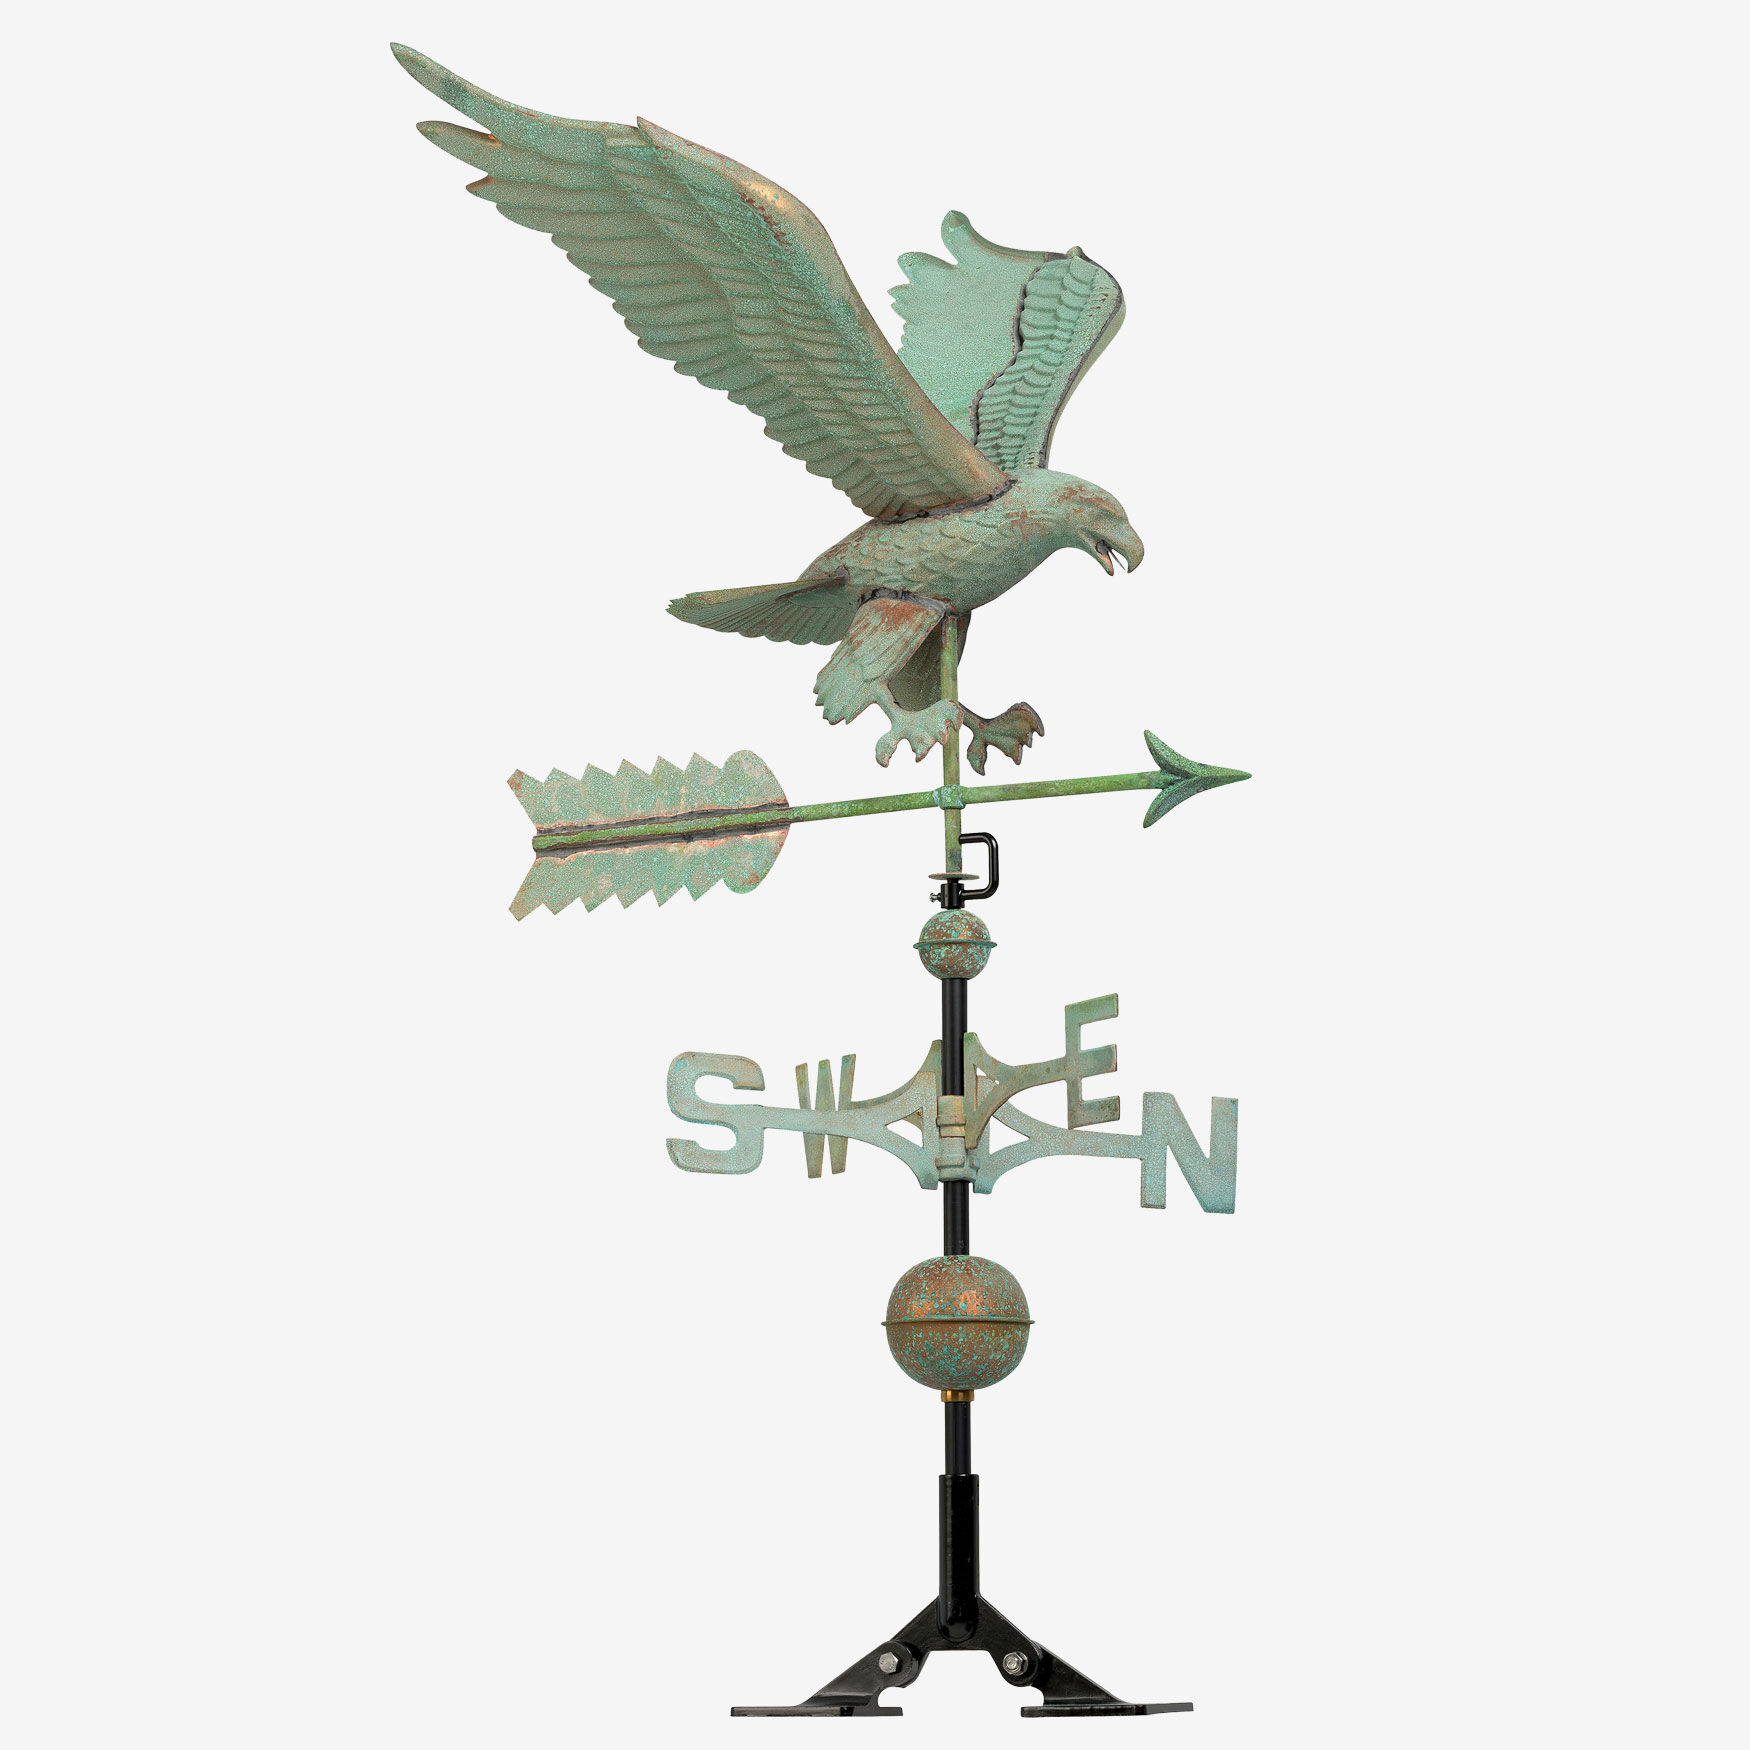 Whitehall 30" Eagle Weathervane Full-Bodied Copper Color Ships SAME Day & FREE 